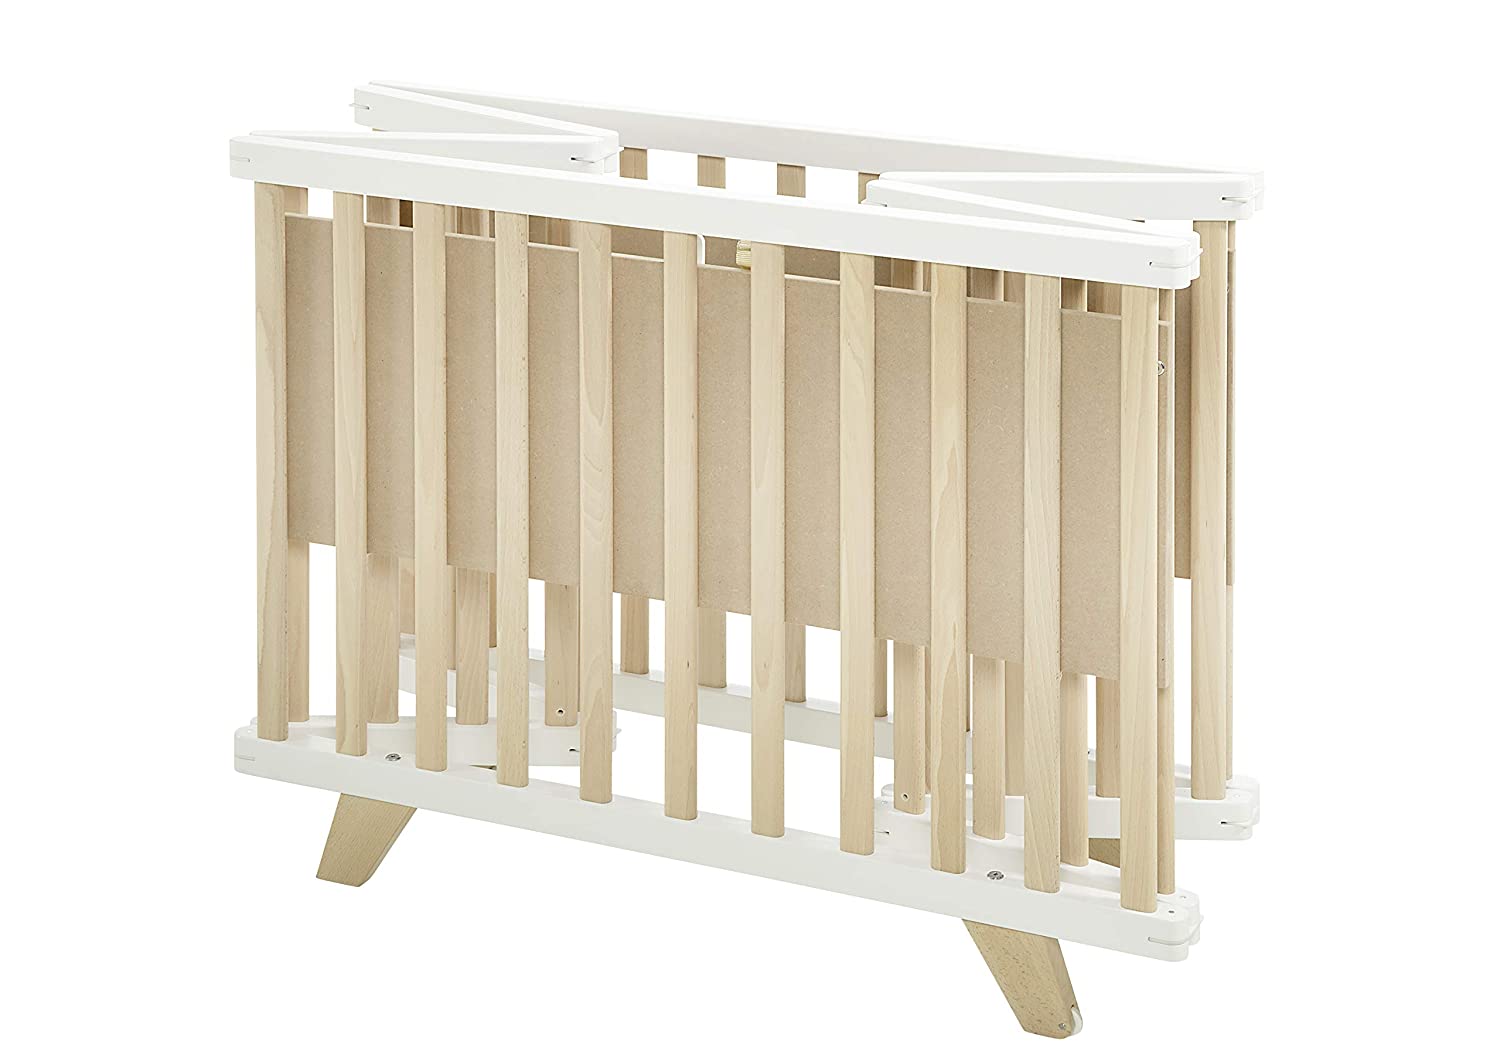 Geuther 2258 NAWE Lasse 2257 Playpen for Folding, Natural/White, 96 x 96 cm, Height-Adjustable, for Wheels, Brown, 20.12 kg, TÜV Tested